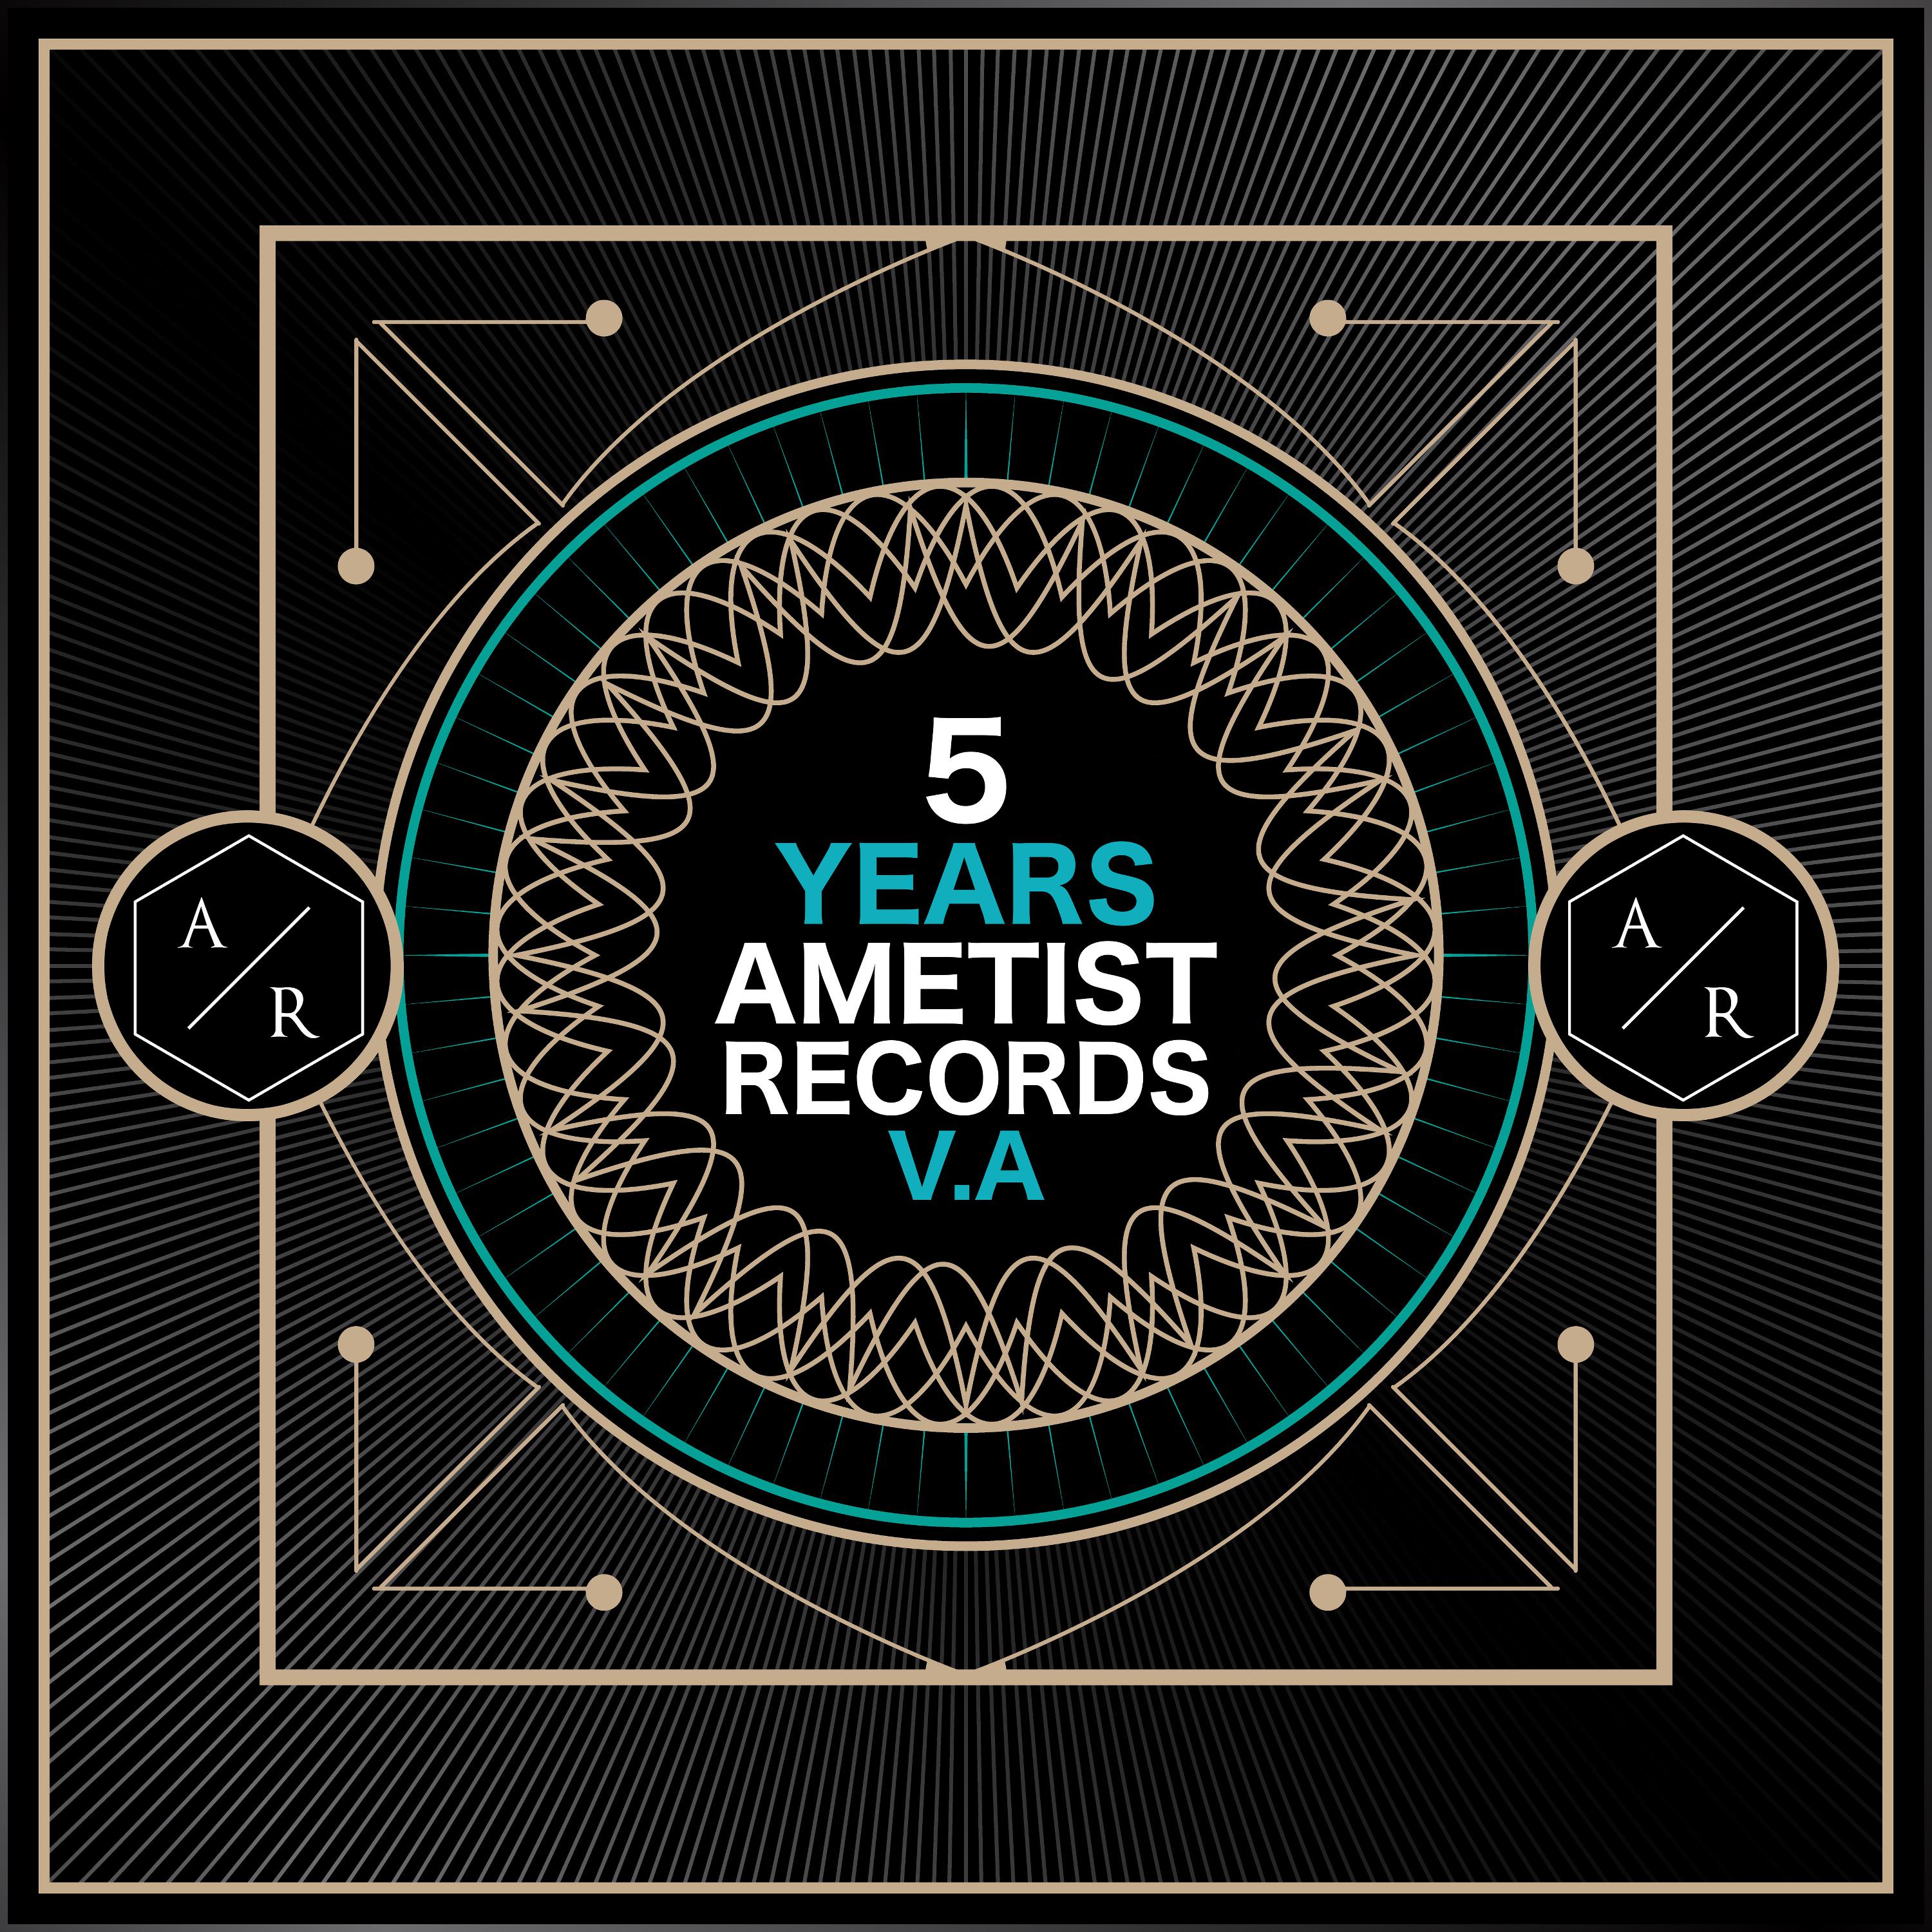 5 Years Ametist Records